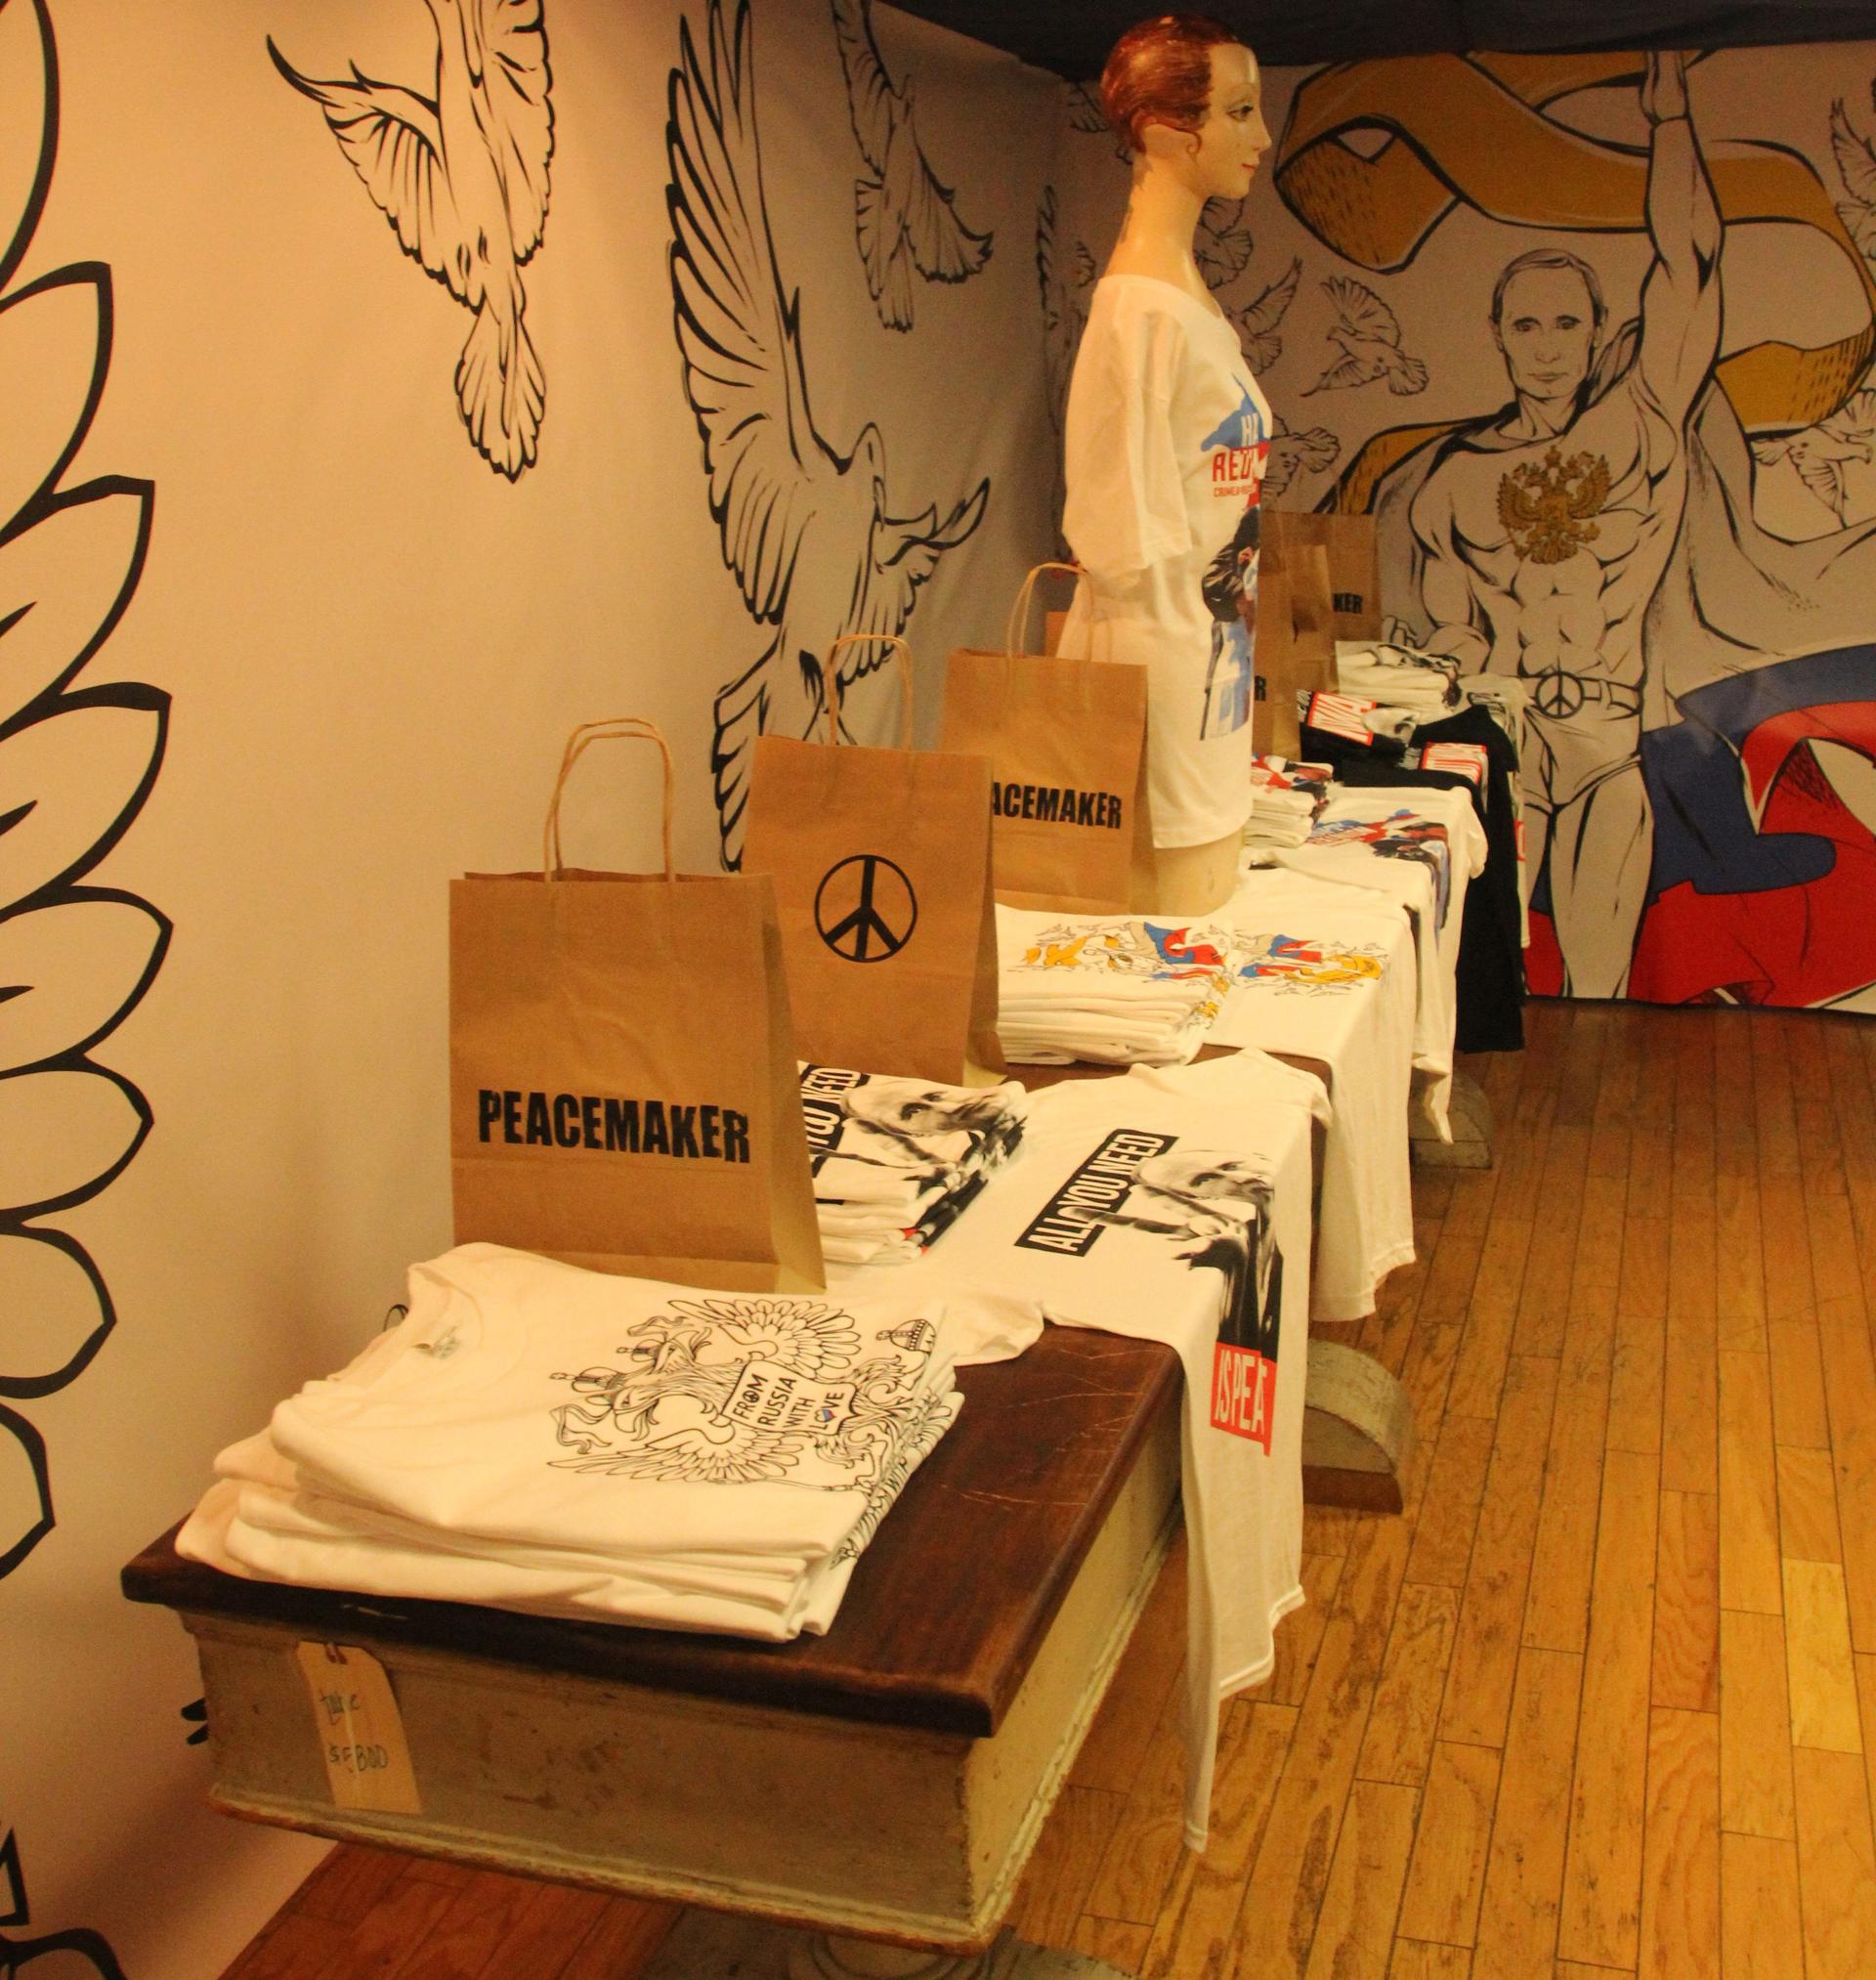 T-Shirts at Kacinskis’s pop-up shop include ones that say “From Russia With Love” with peace and heart symbols replacing the Os, “Make Love Not War,” and “All We Need Is Peace.”